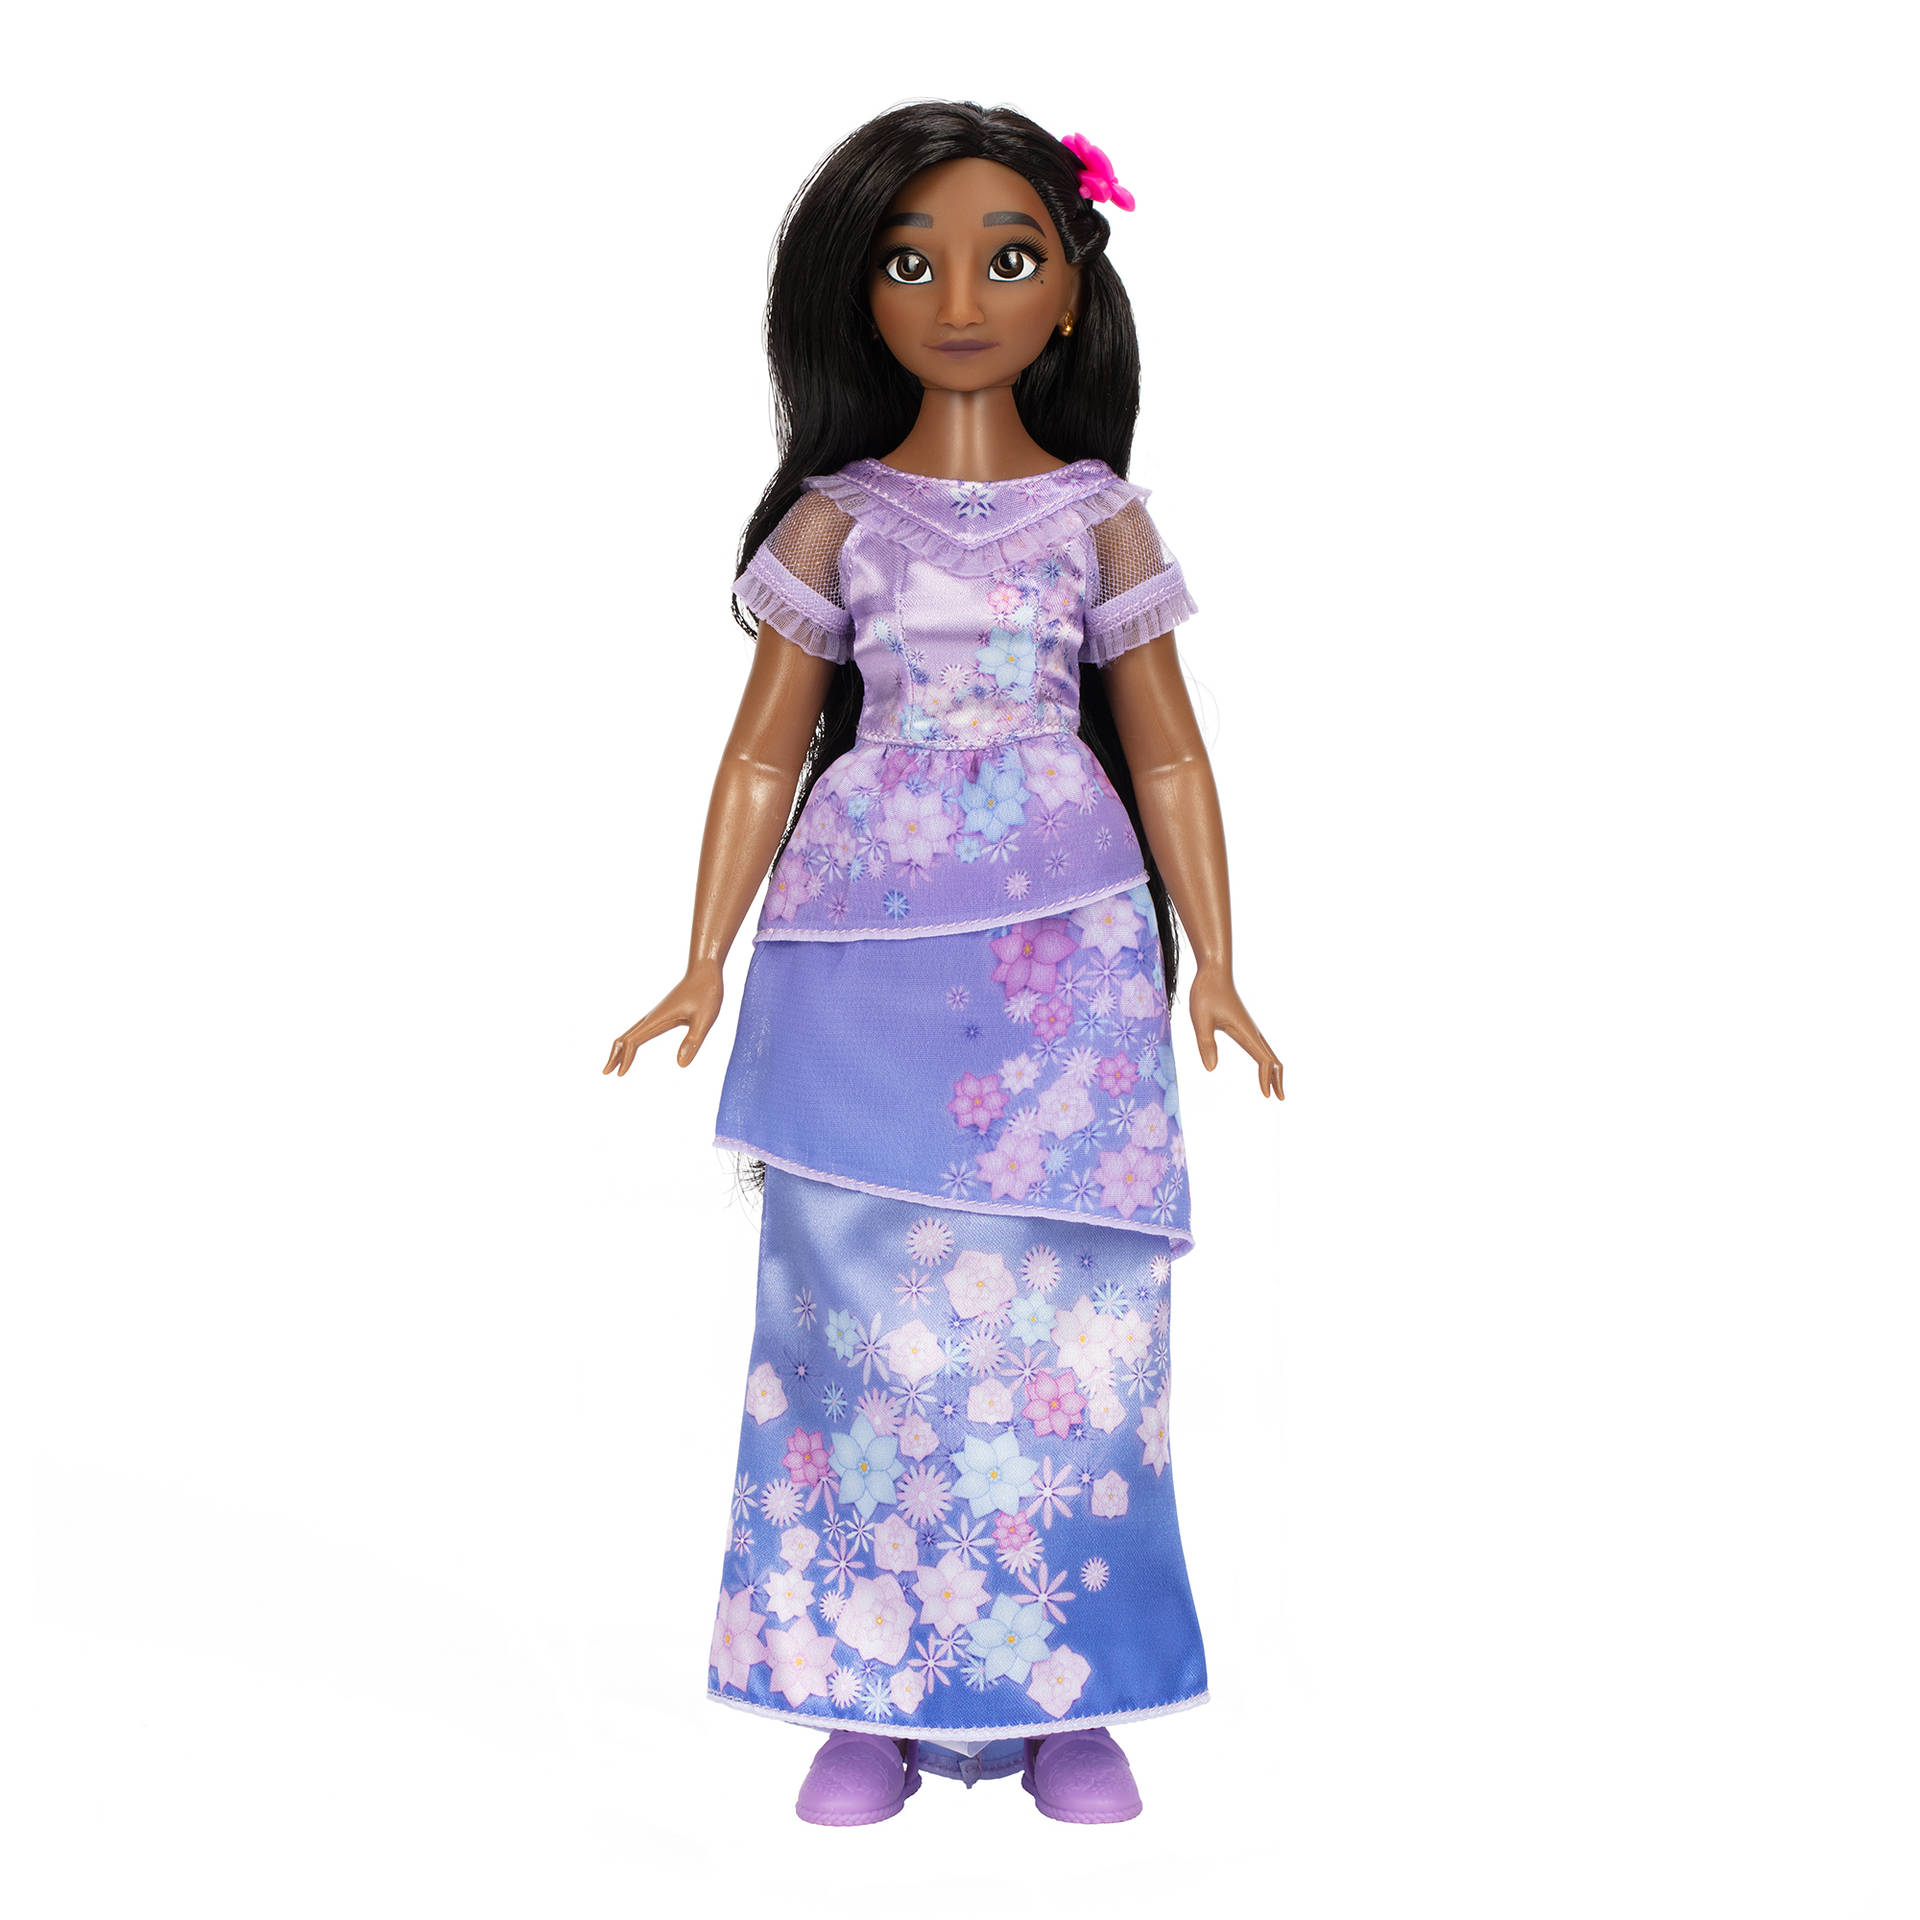 Caption: Isabela Madrigal - The Doll Version Of The Enchanting Disney Character Background